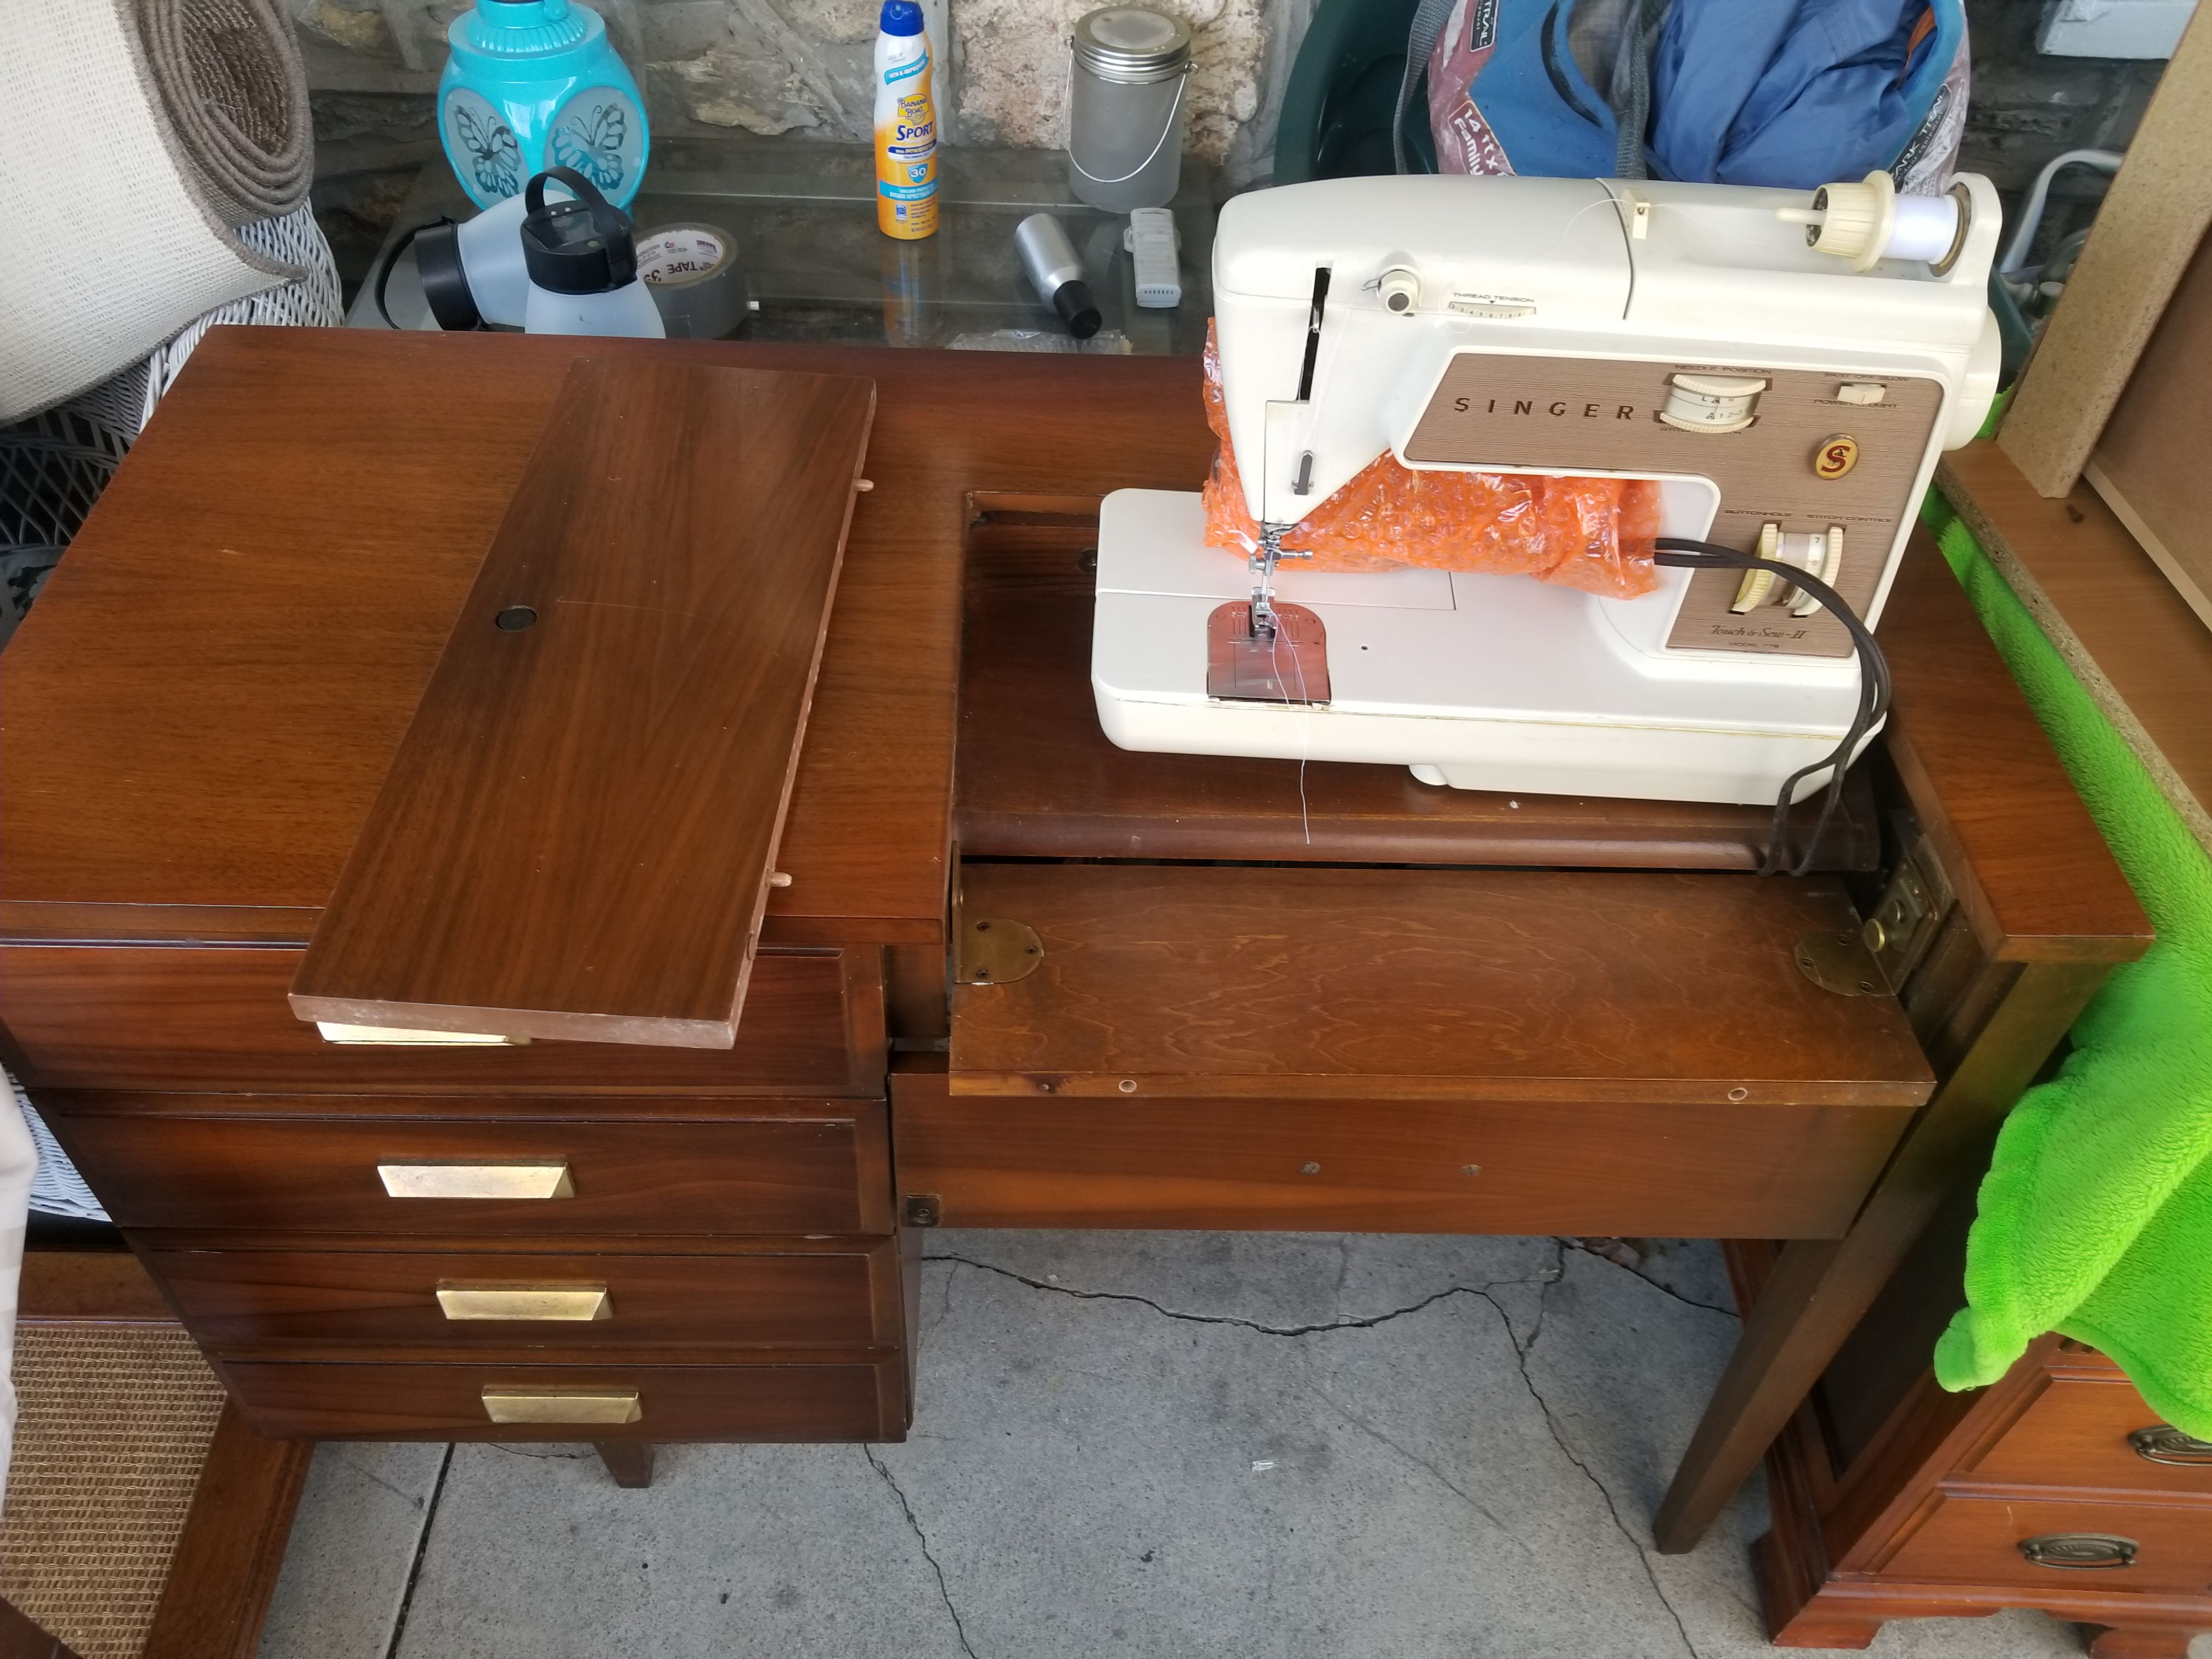 Singer sewing machine and desk